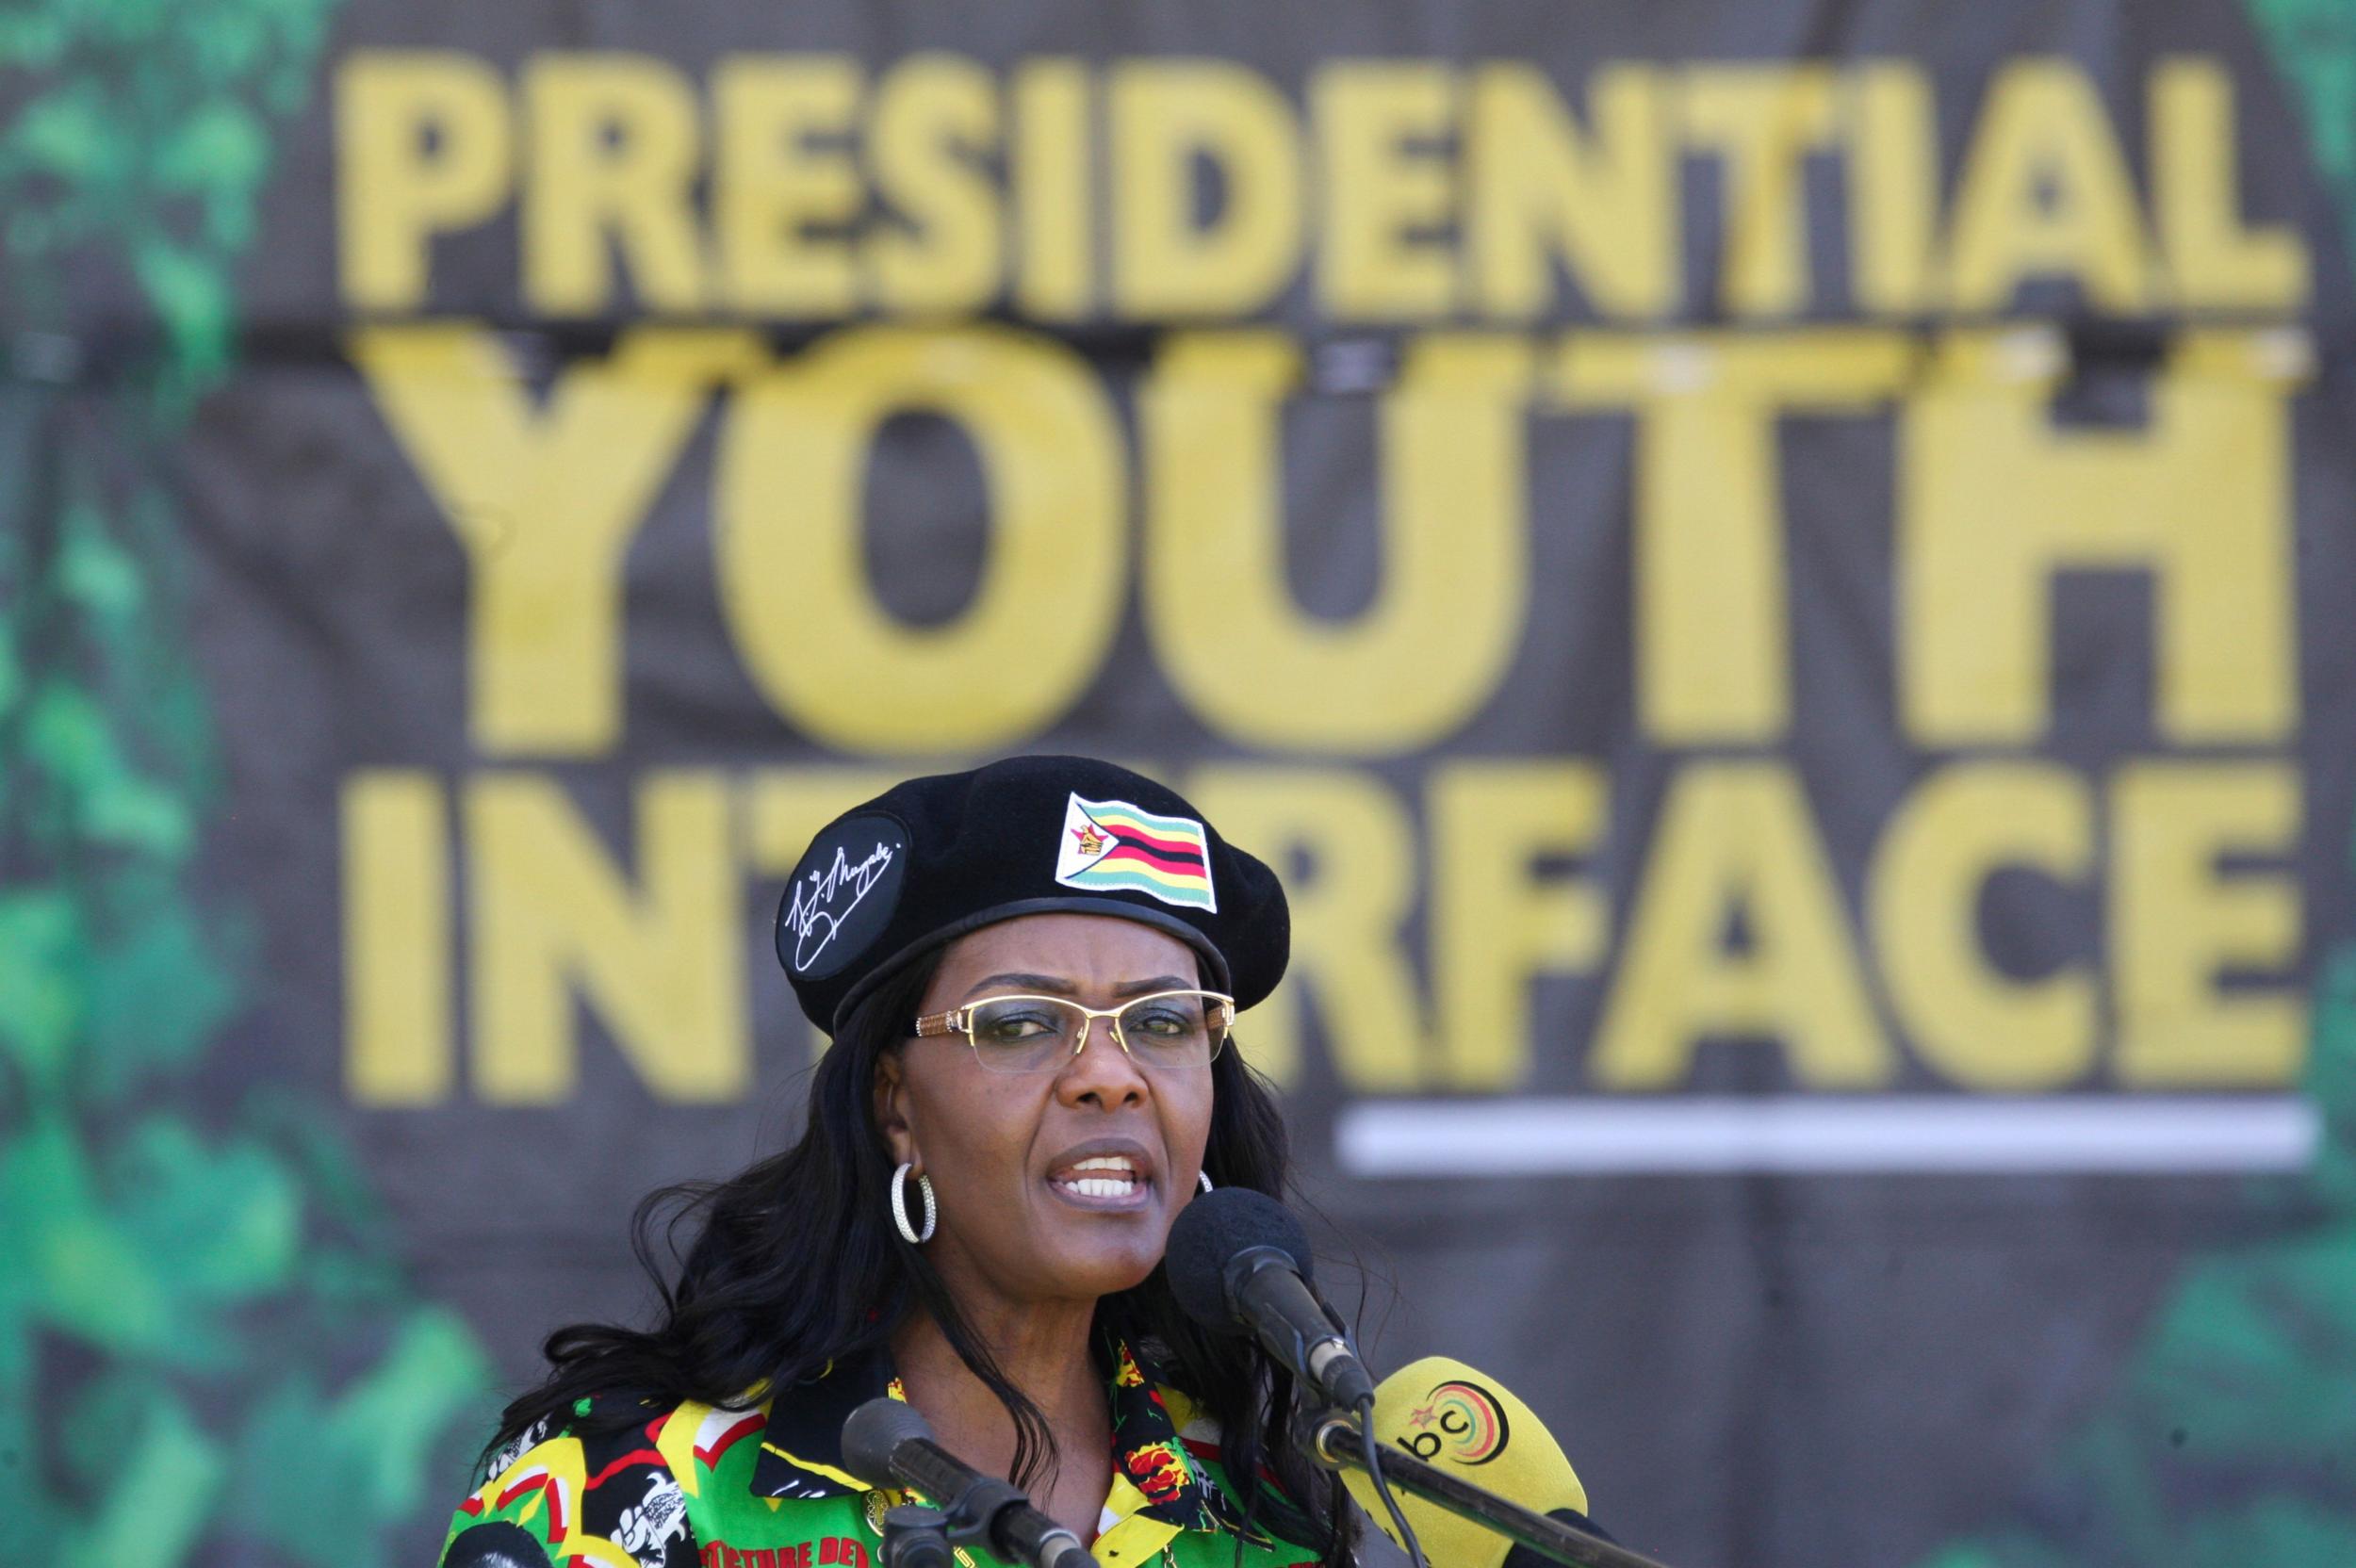 Grace Mugabe is keeping a low profile as Zimbabweans speak out about her excesses